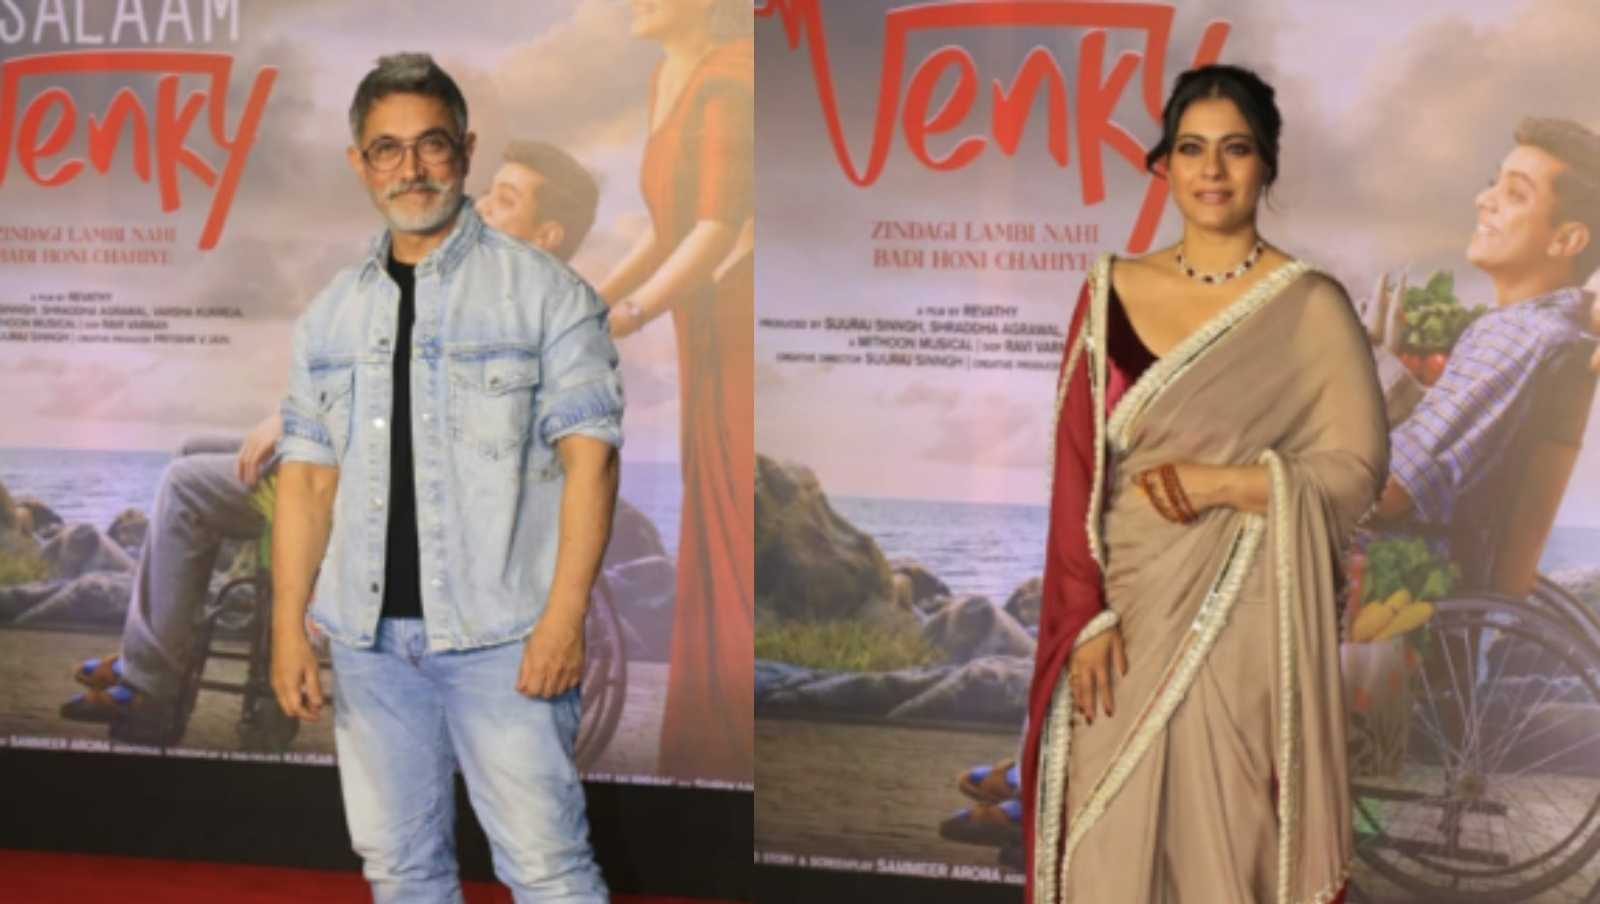 Aamir Khan, Kajol and others make the Salaam Venky screening a starry affair, see pics